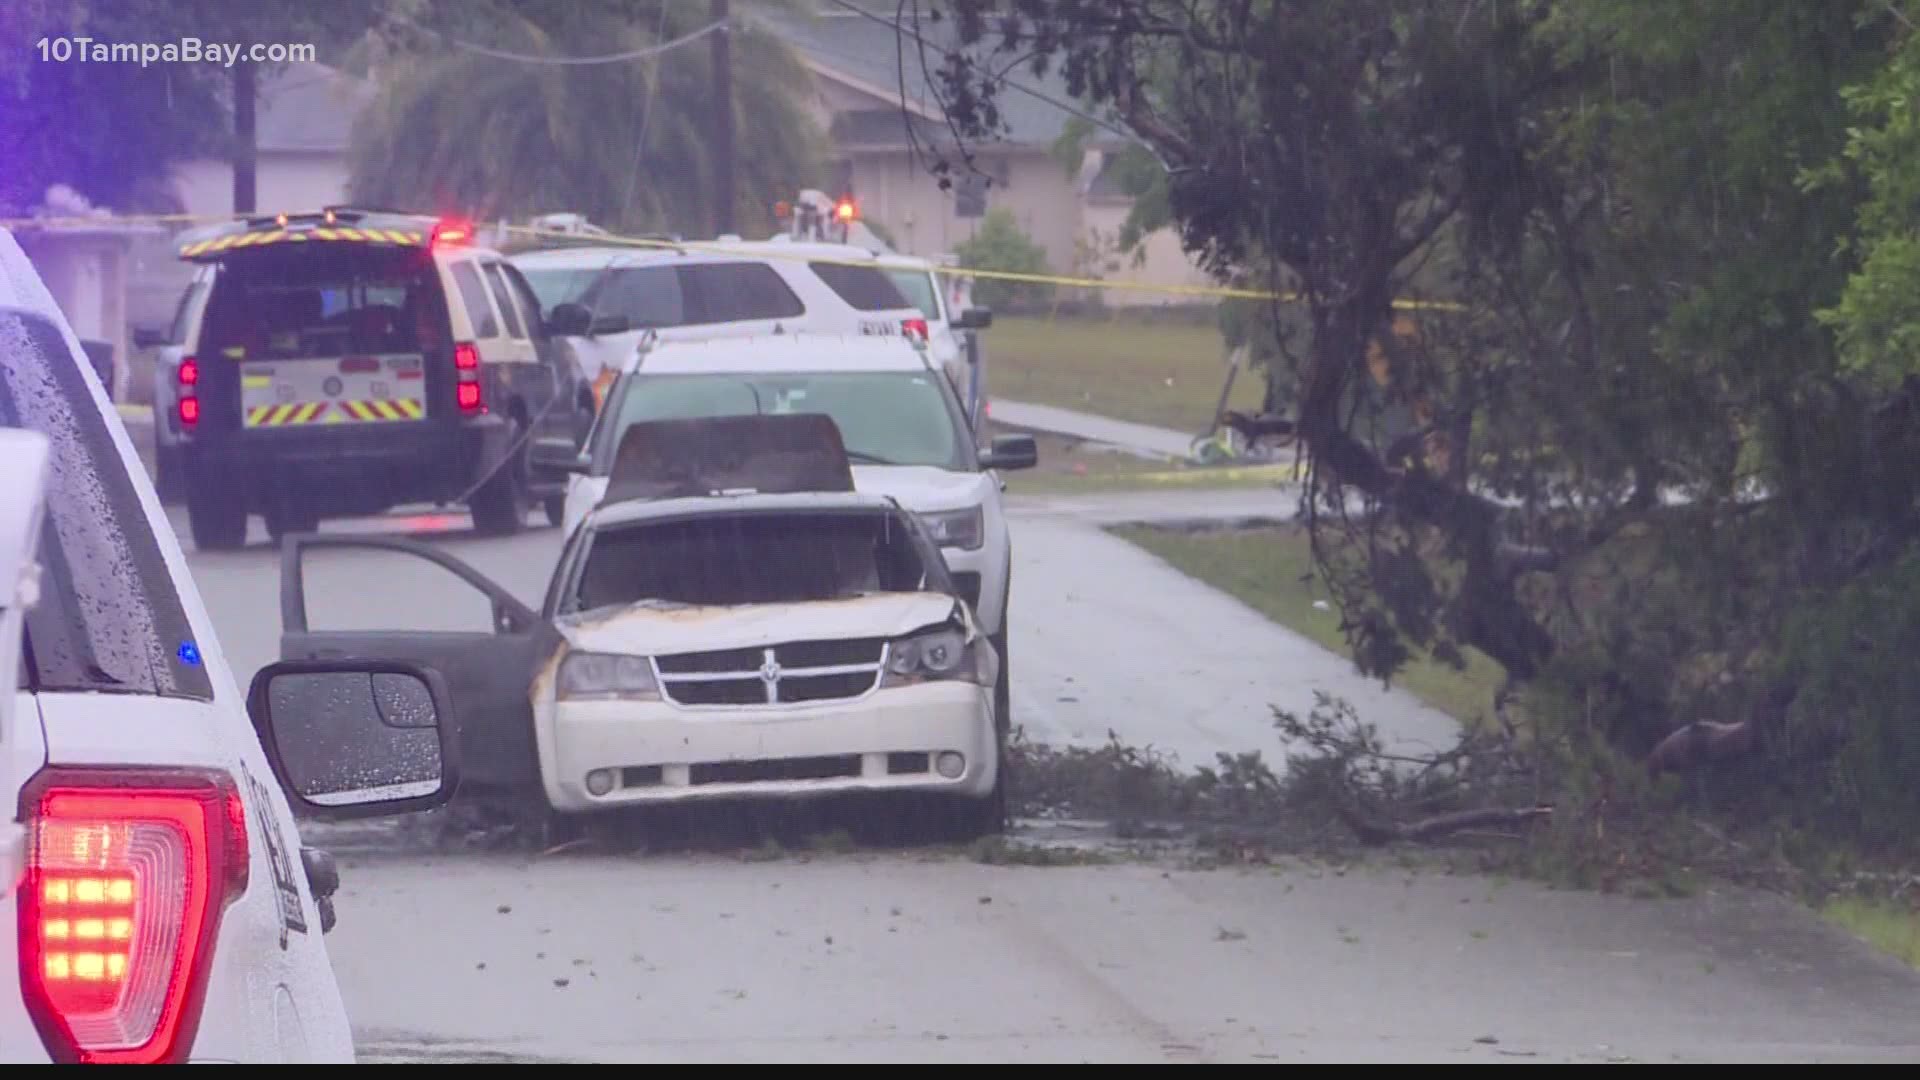 A 17-year-old girl was electrocuted when she came in contact with a downed power line during strong storms Sunday afternoon.